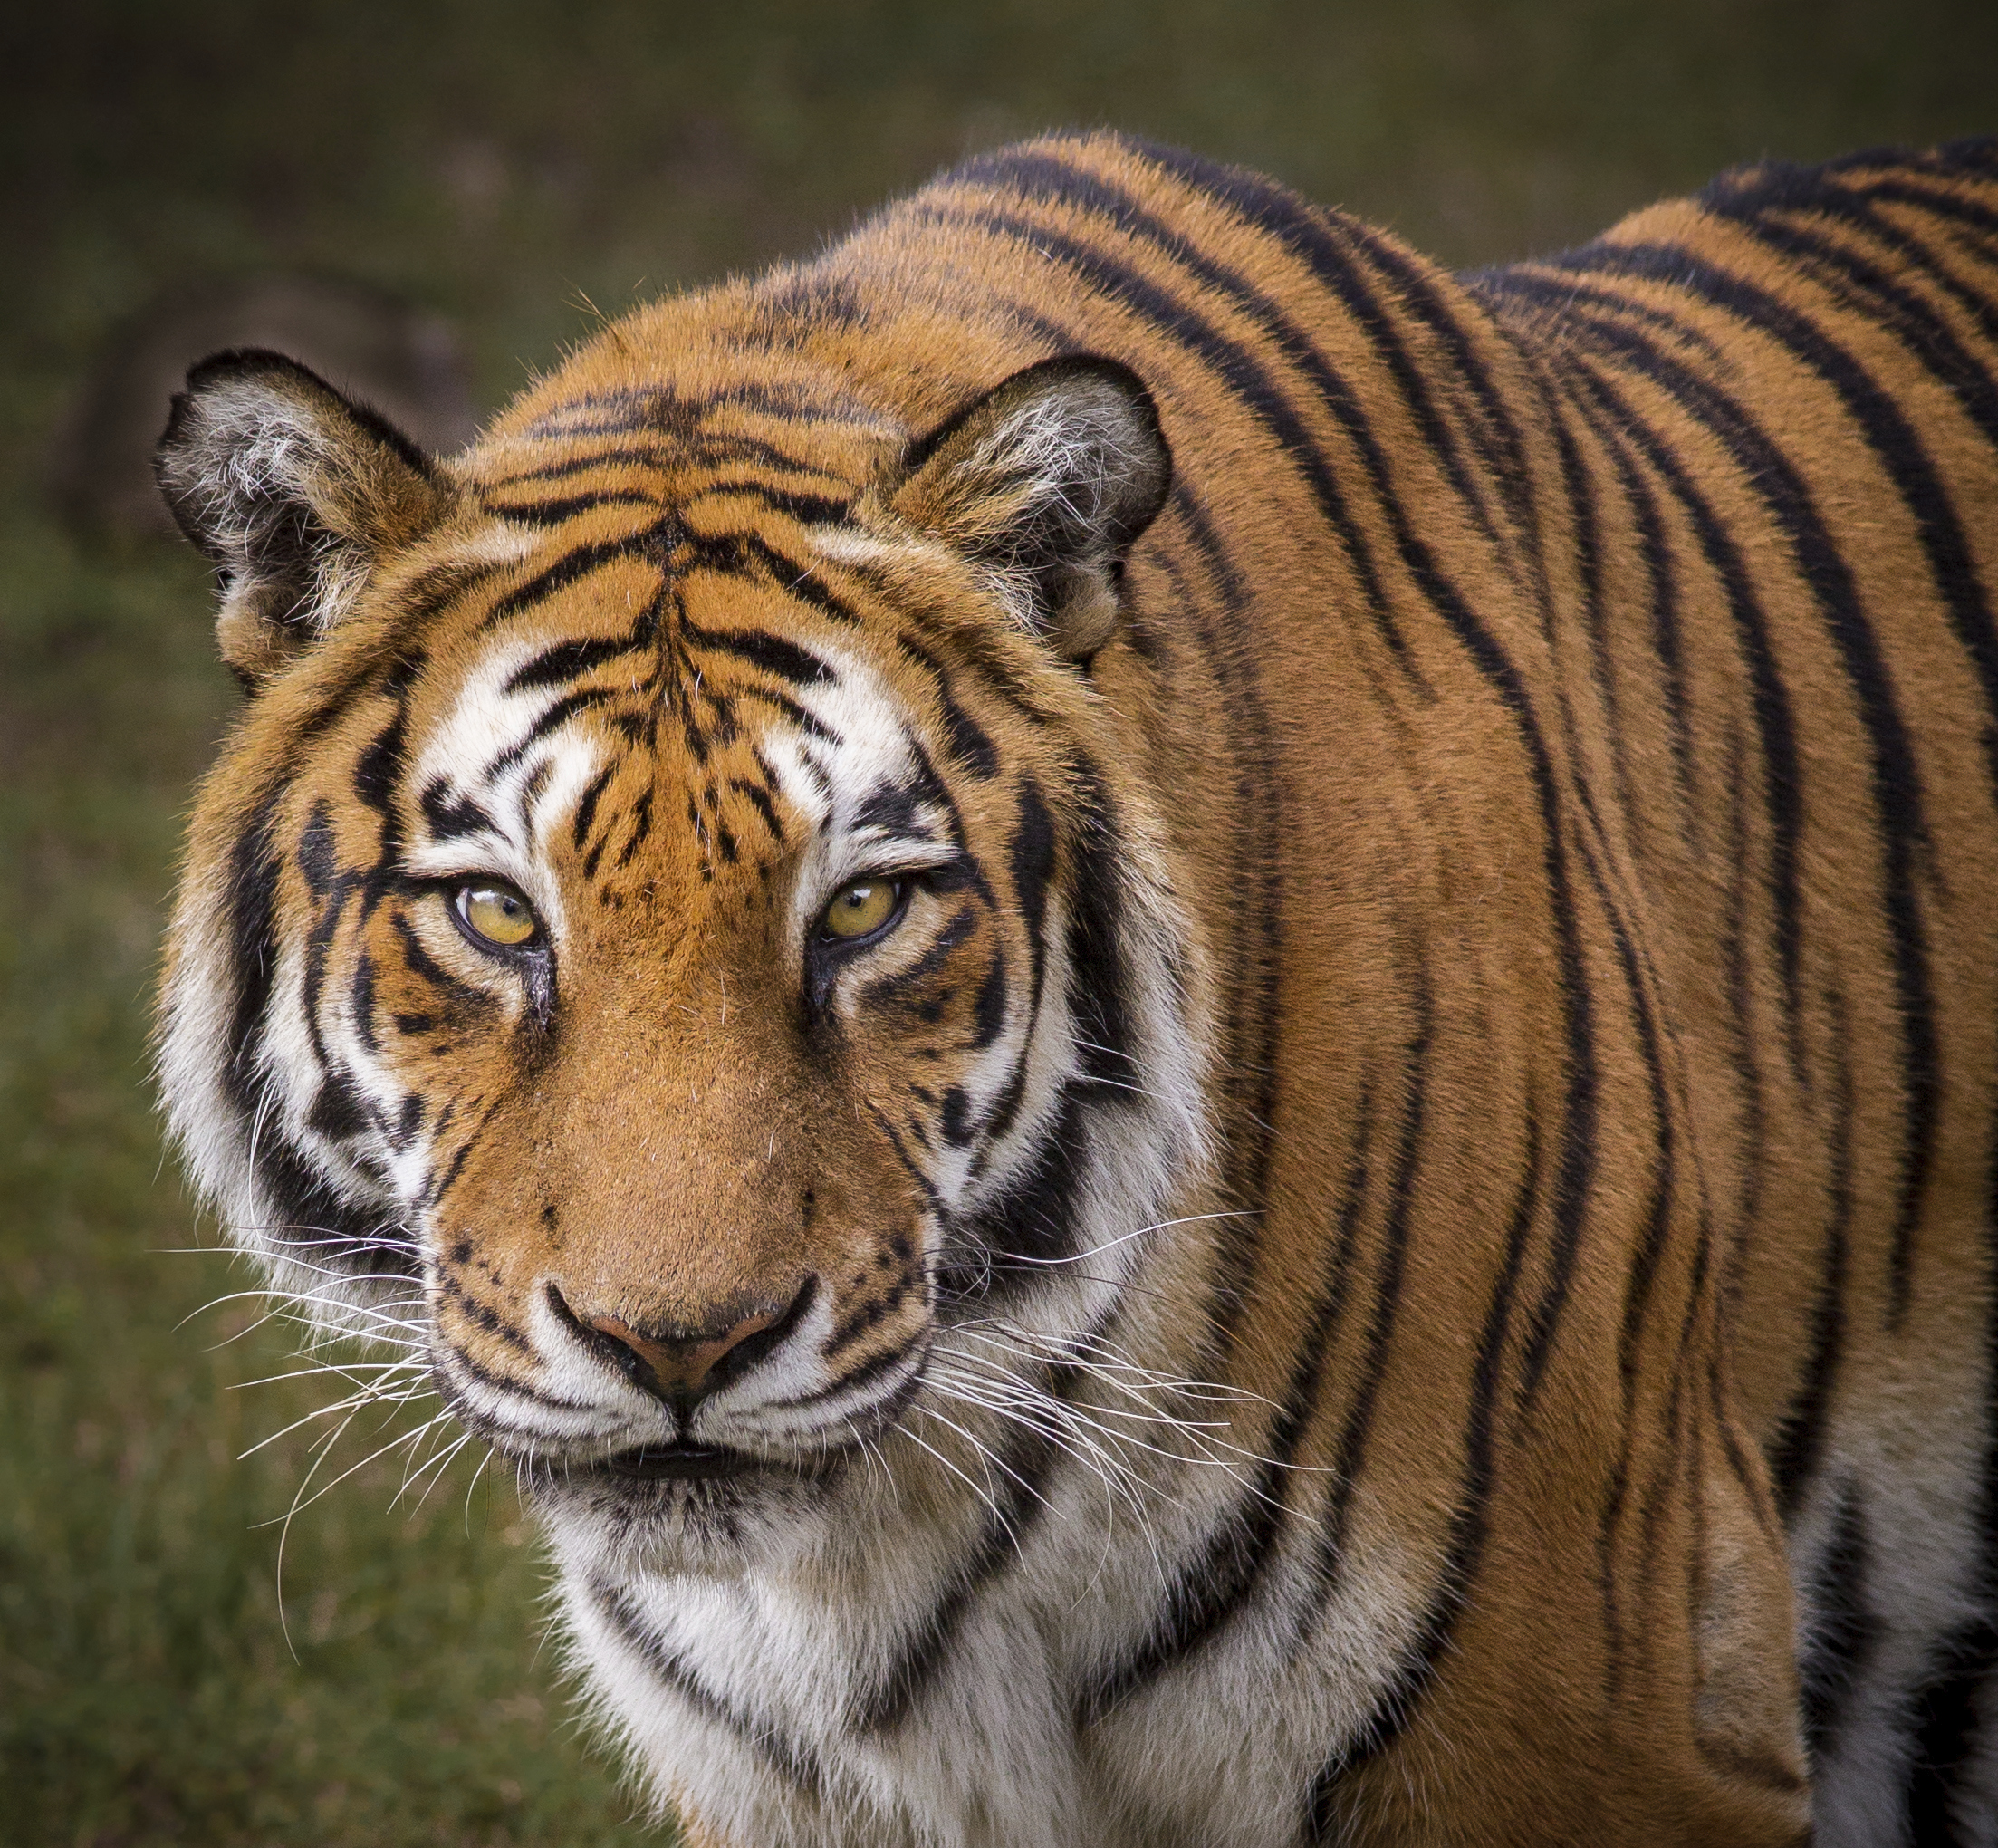 What Are Some Adaptations of a Tiger? | Animals - mom.me